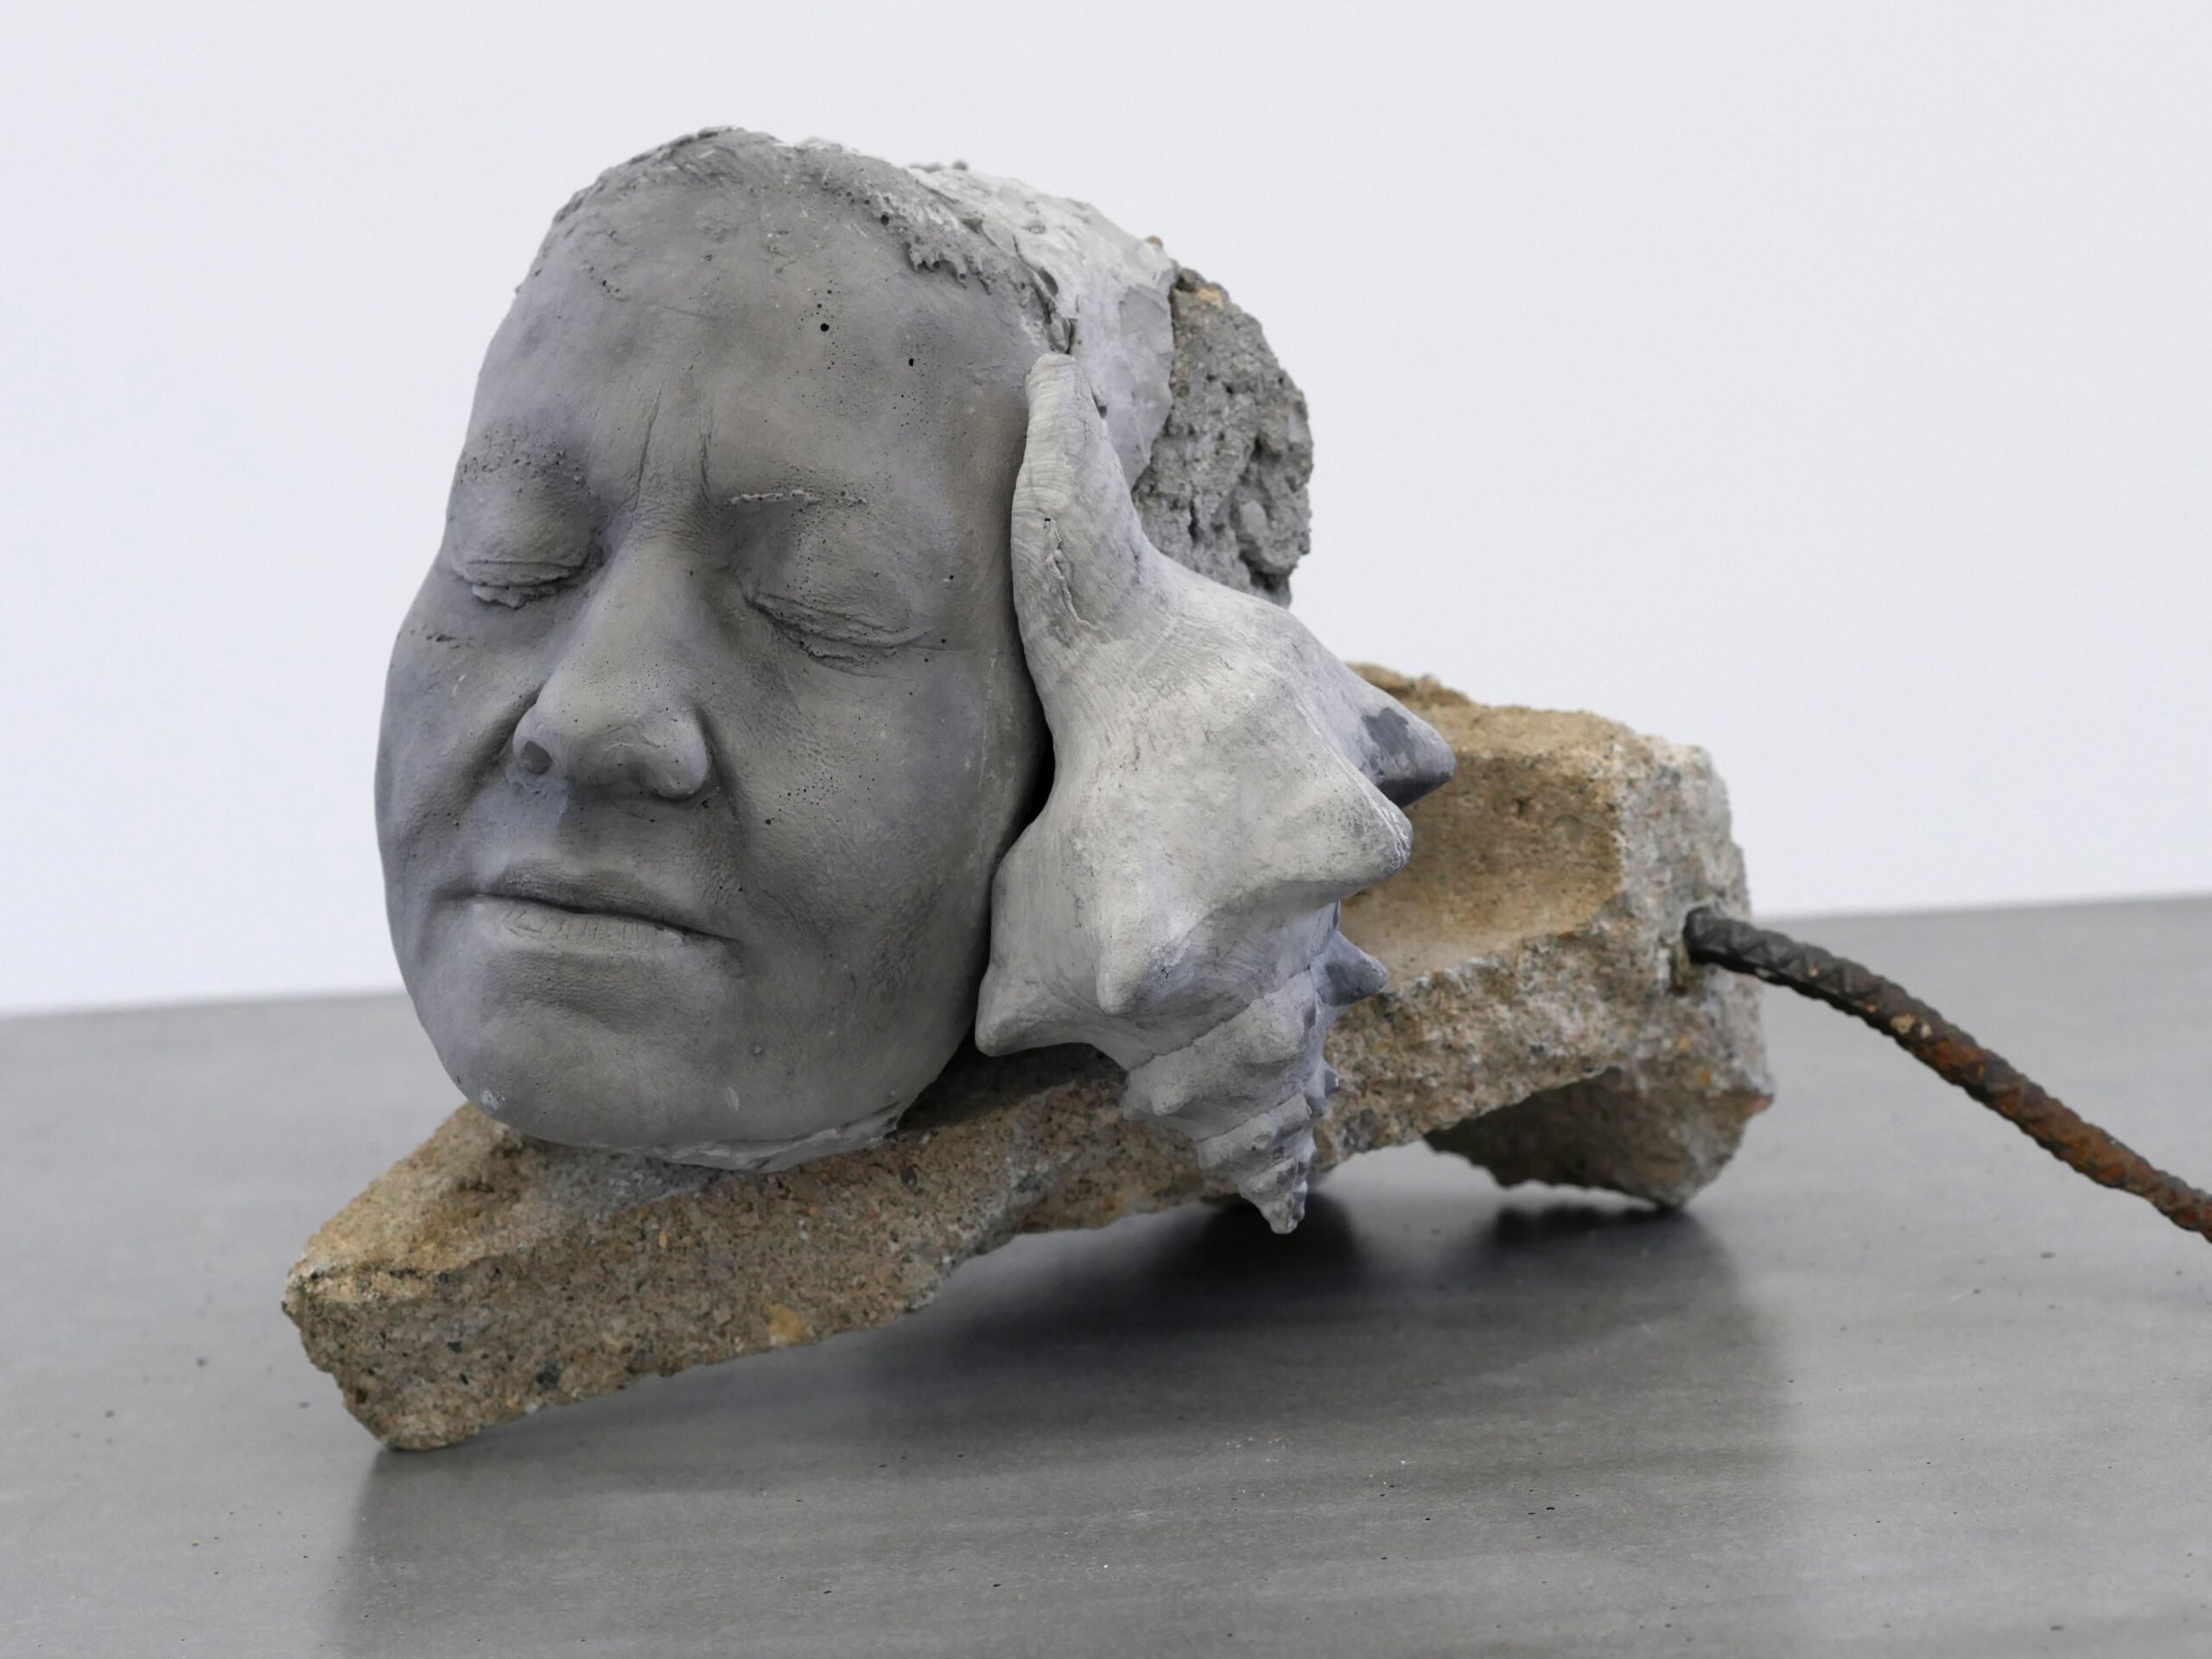 Cast concrete face with closed eyes and seashell mounted on concrete shard